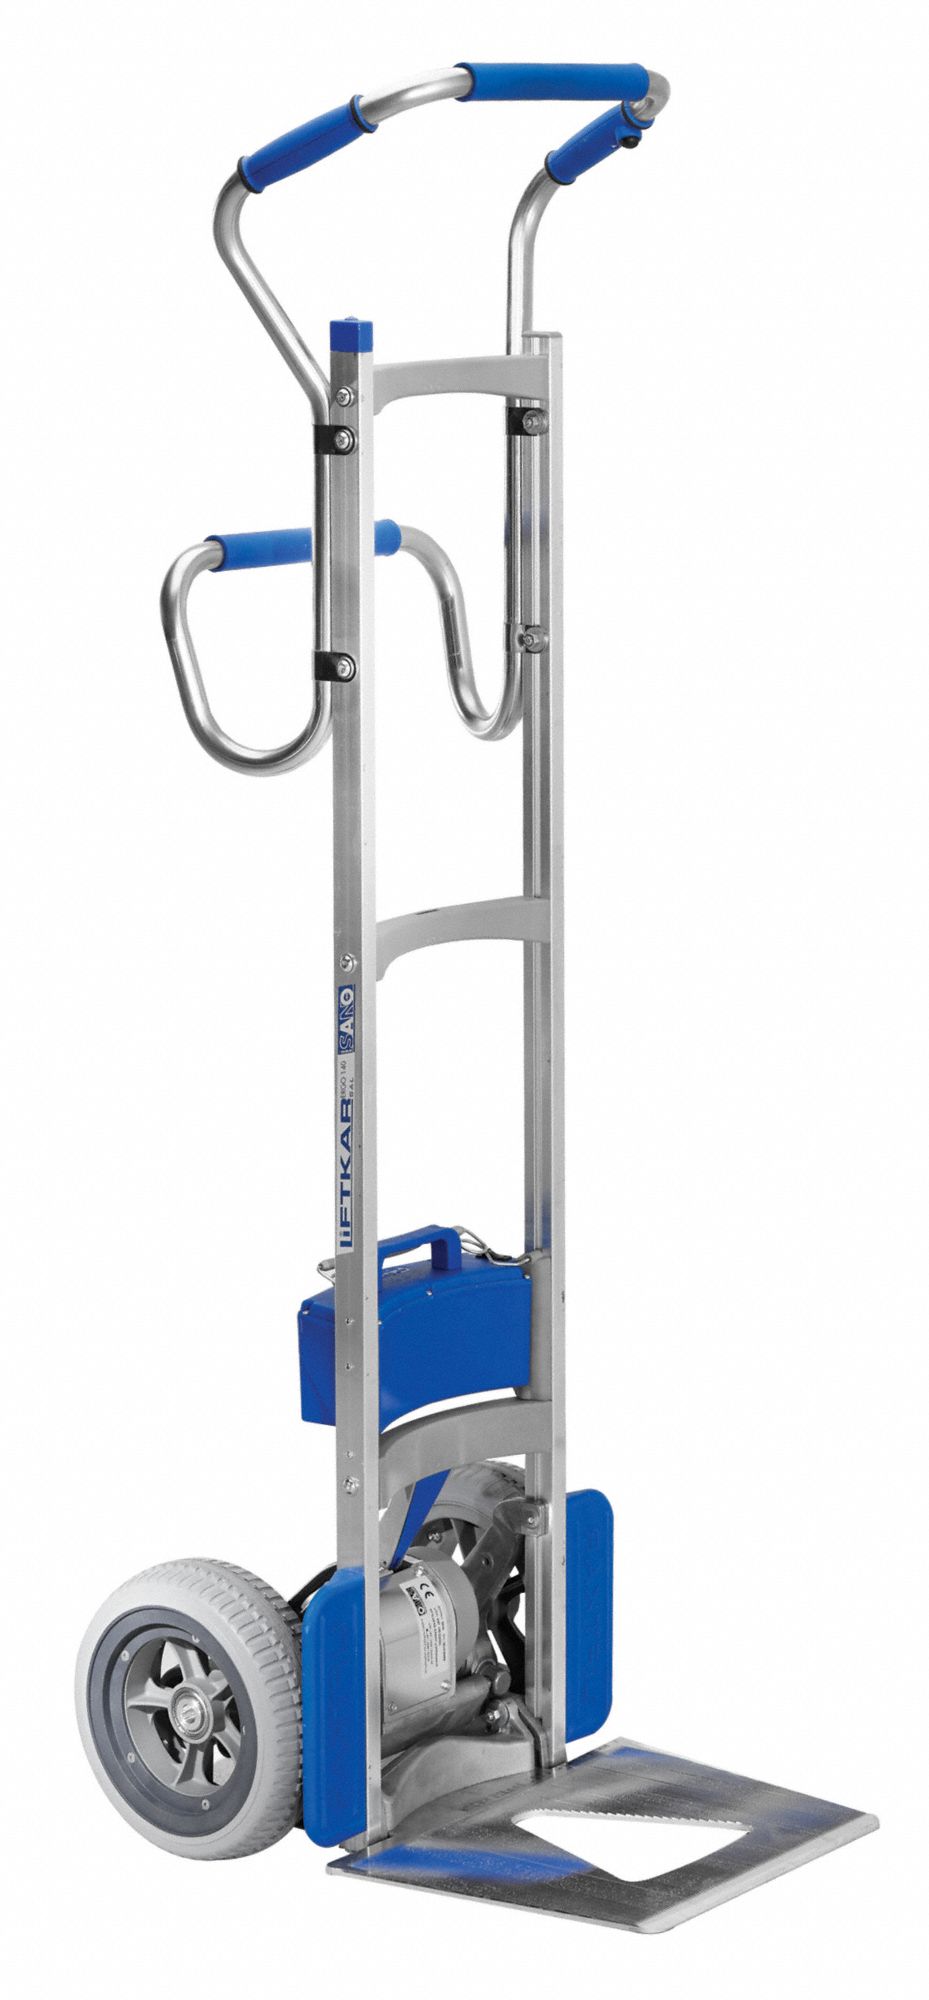 Stair Climbing Hand Truck: 375 lb Load Capacity, 16.5 in x 13.4 in, Flat-Free